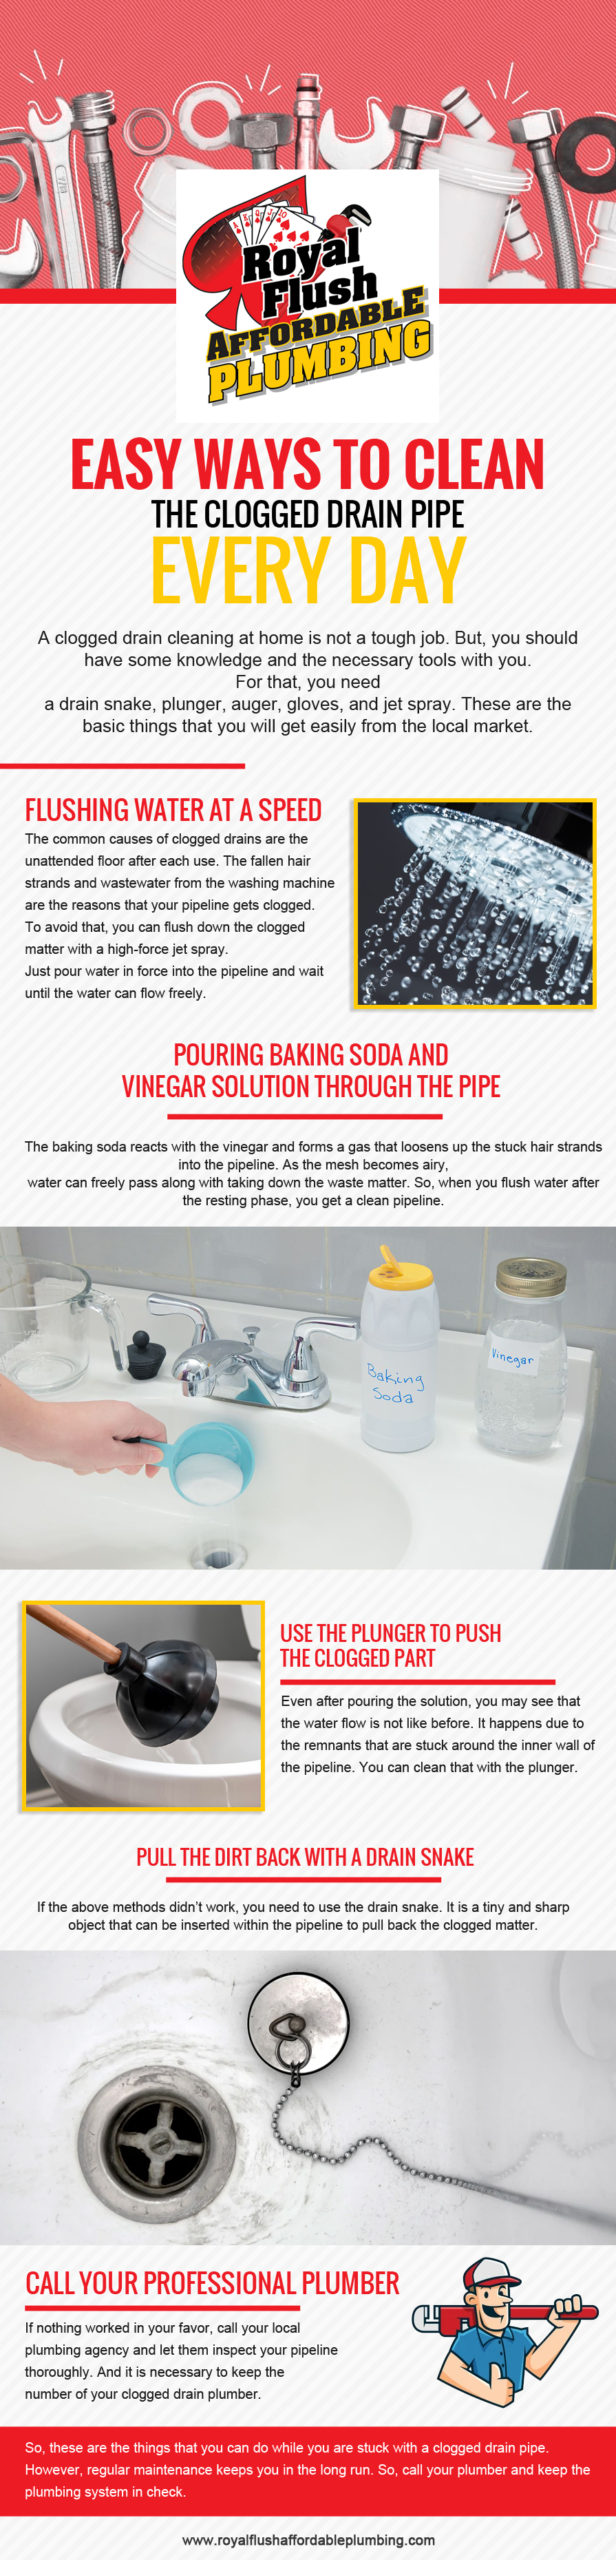 Easy Ways To Clean The Clogged Drain Pipe Every Day